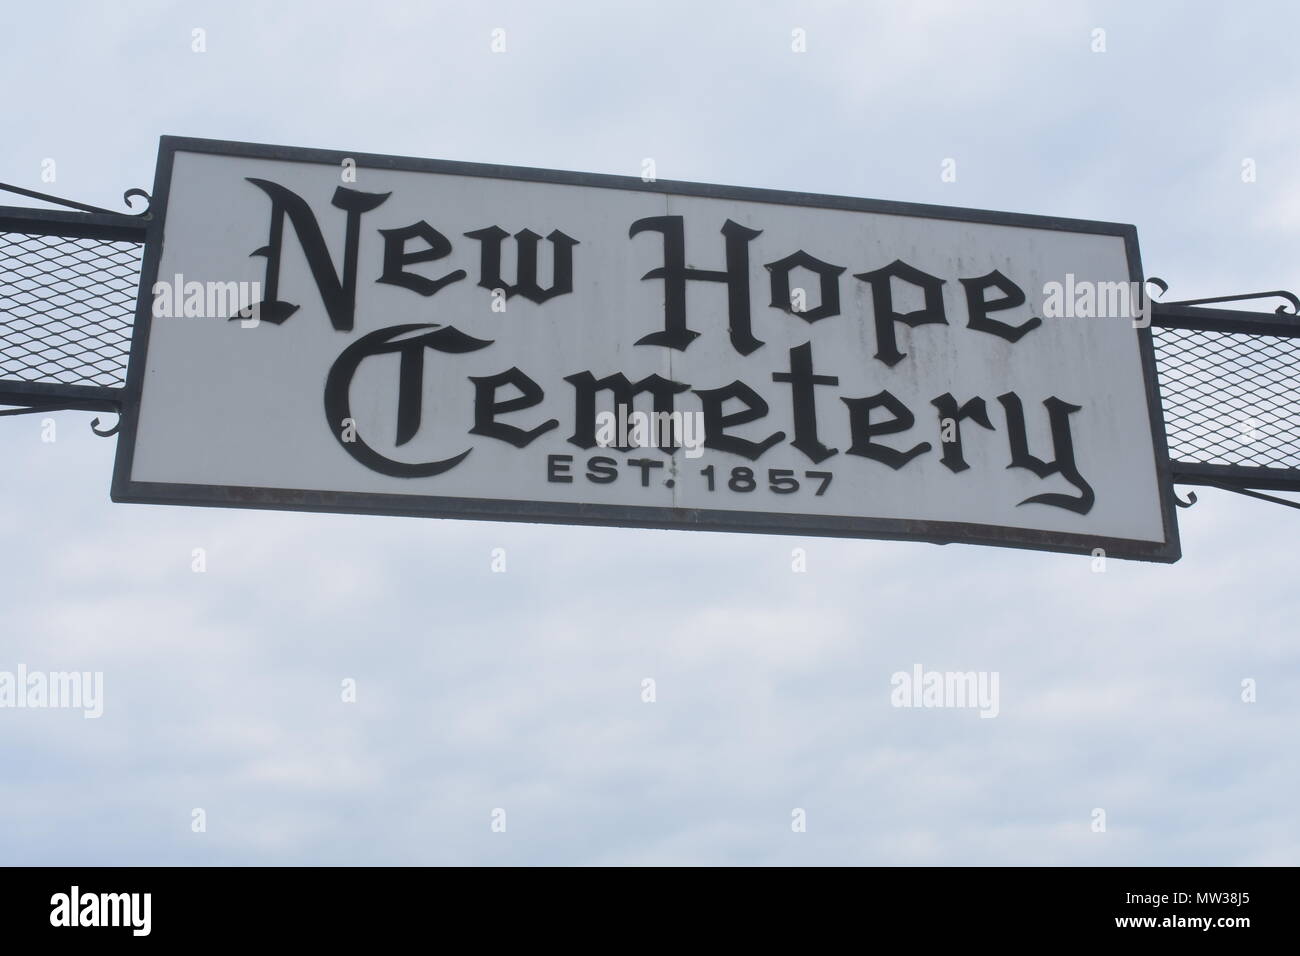 Sign over main entrance to New Hope Cemetery, located in Dallas County, Missouri, MO, United States, US, USA. The cemetery was established in 1857. Stock Photo